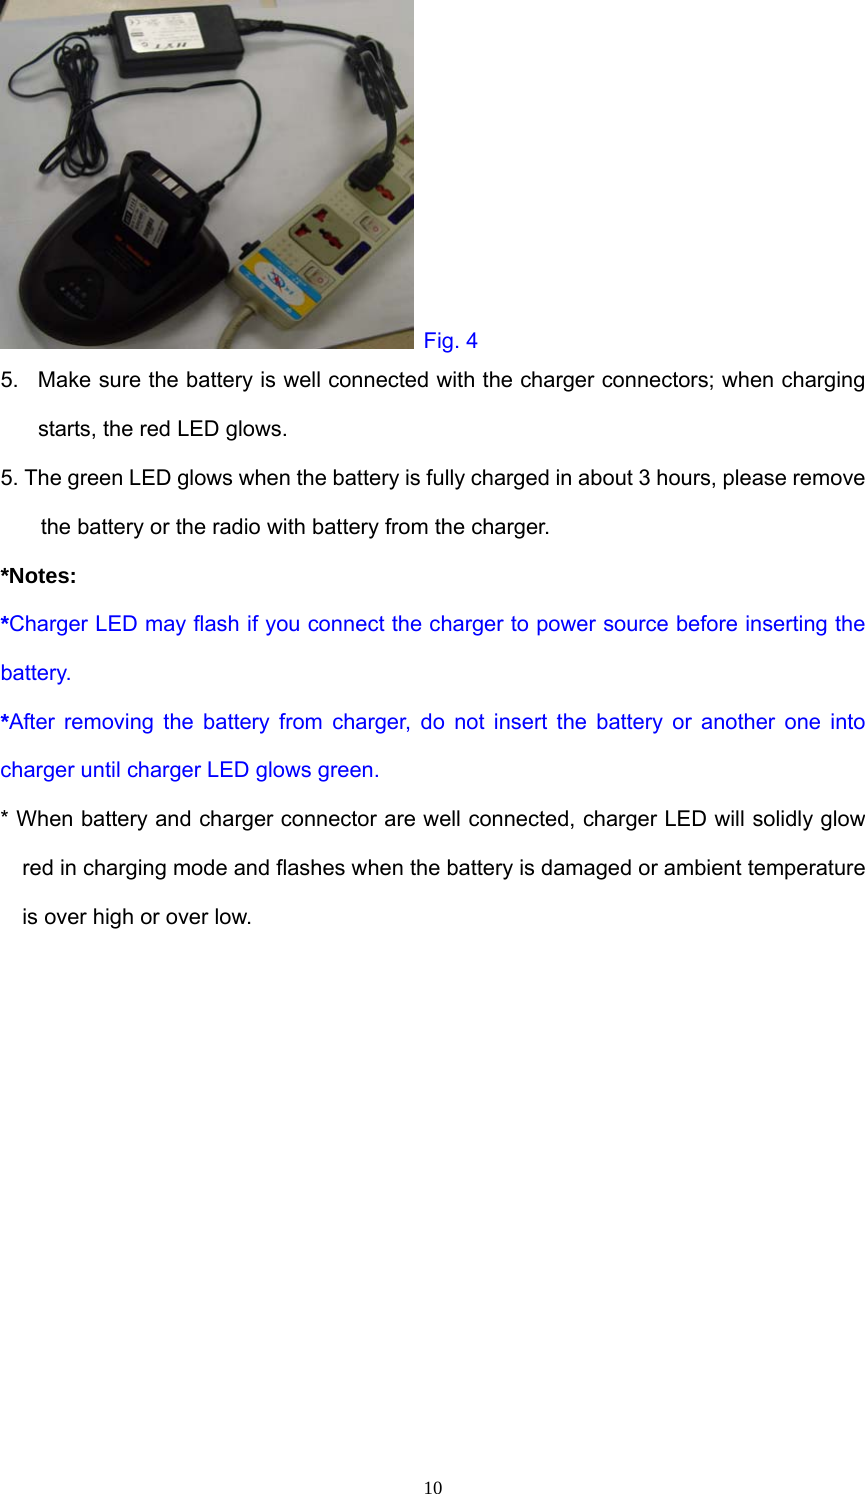  Fig. 4 5.  Make sure the battery is well connected with the charger connectors; when charging starts, the red LED glows. 5. The green LED glows when the battery is fully charged in about 3 hours, please remove the battery or the radio with battery from the charger. *Notes: *Charger LED may flash if you connect the charger to power source before inserting the battery. *After removing the battery from charger, do not insert the battery or another one into charger until charger LED glows green. * When battery and charger connector are well connected, charger LED will solidly glow red in charging mode and flashes when the battery is damaged or ambient temperature is over high or over low.            10